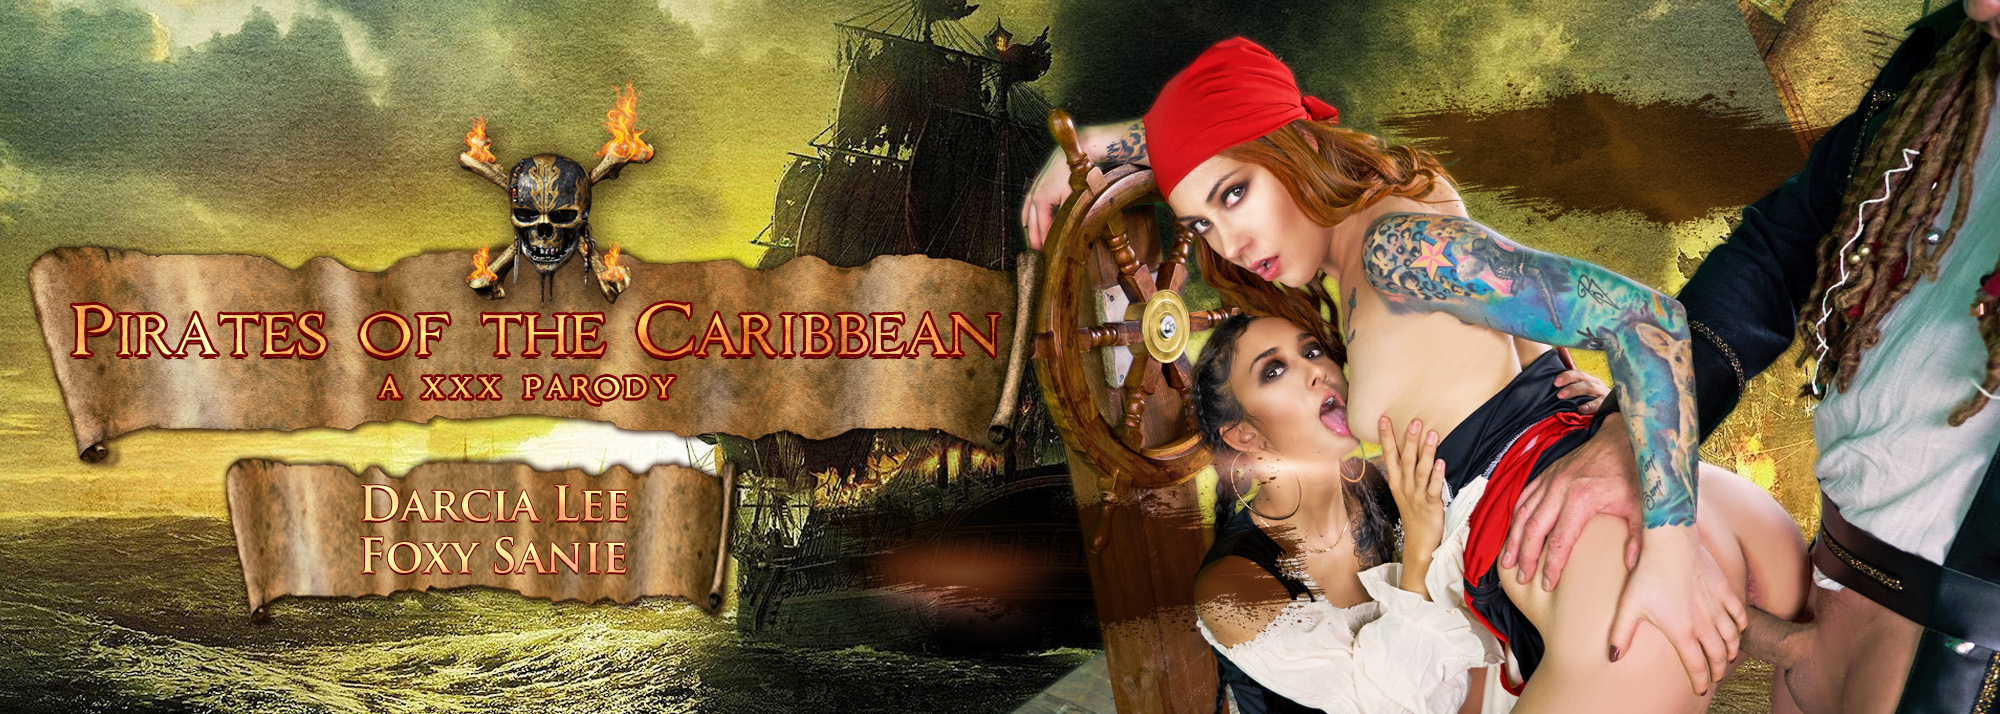 Xxx Pirates Full Movie Download - Pirates of the Caribbean (A XXX Parody) - VR Cosplay Porn | VR Conk